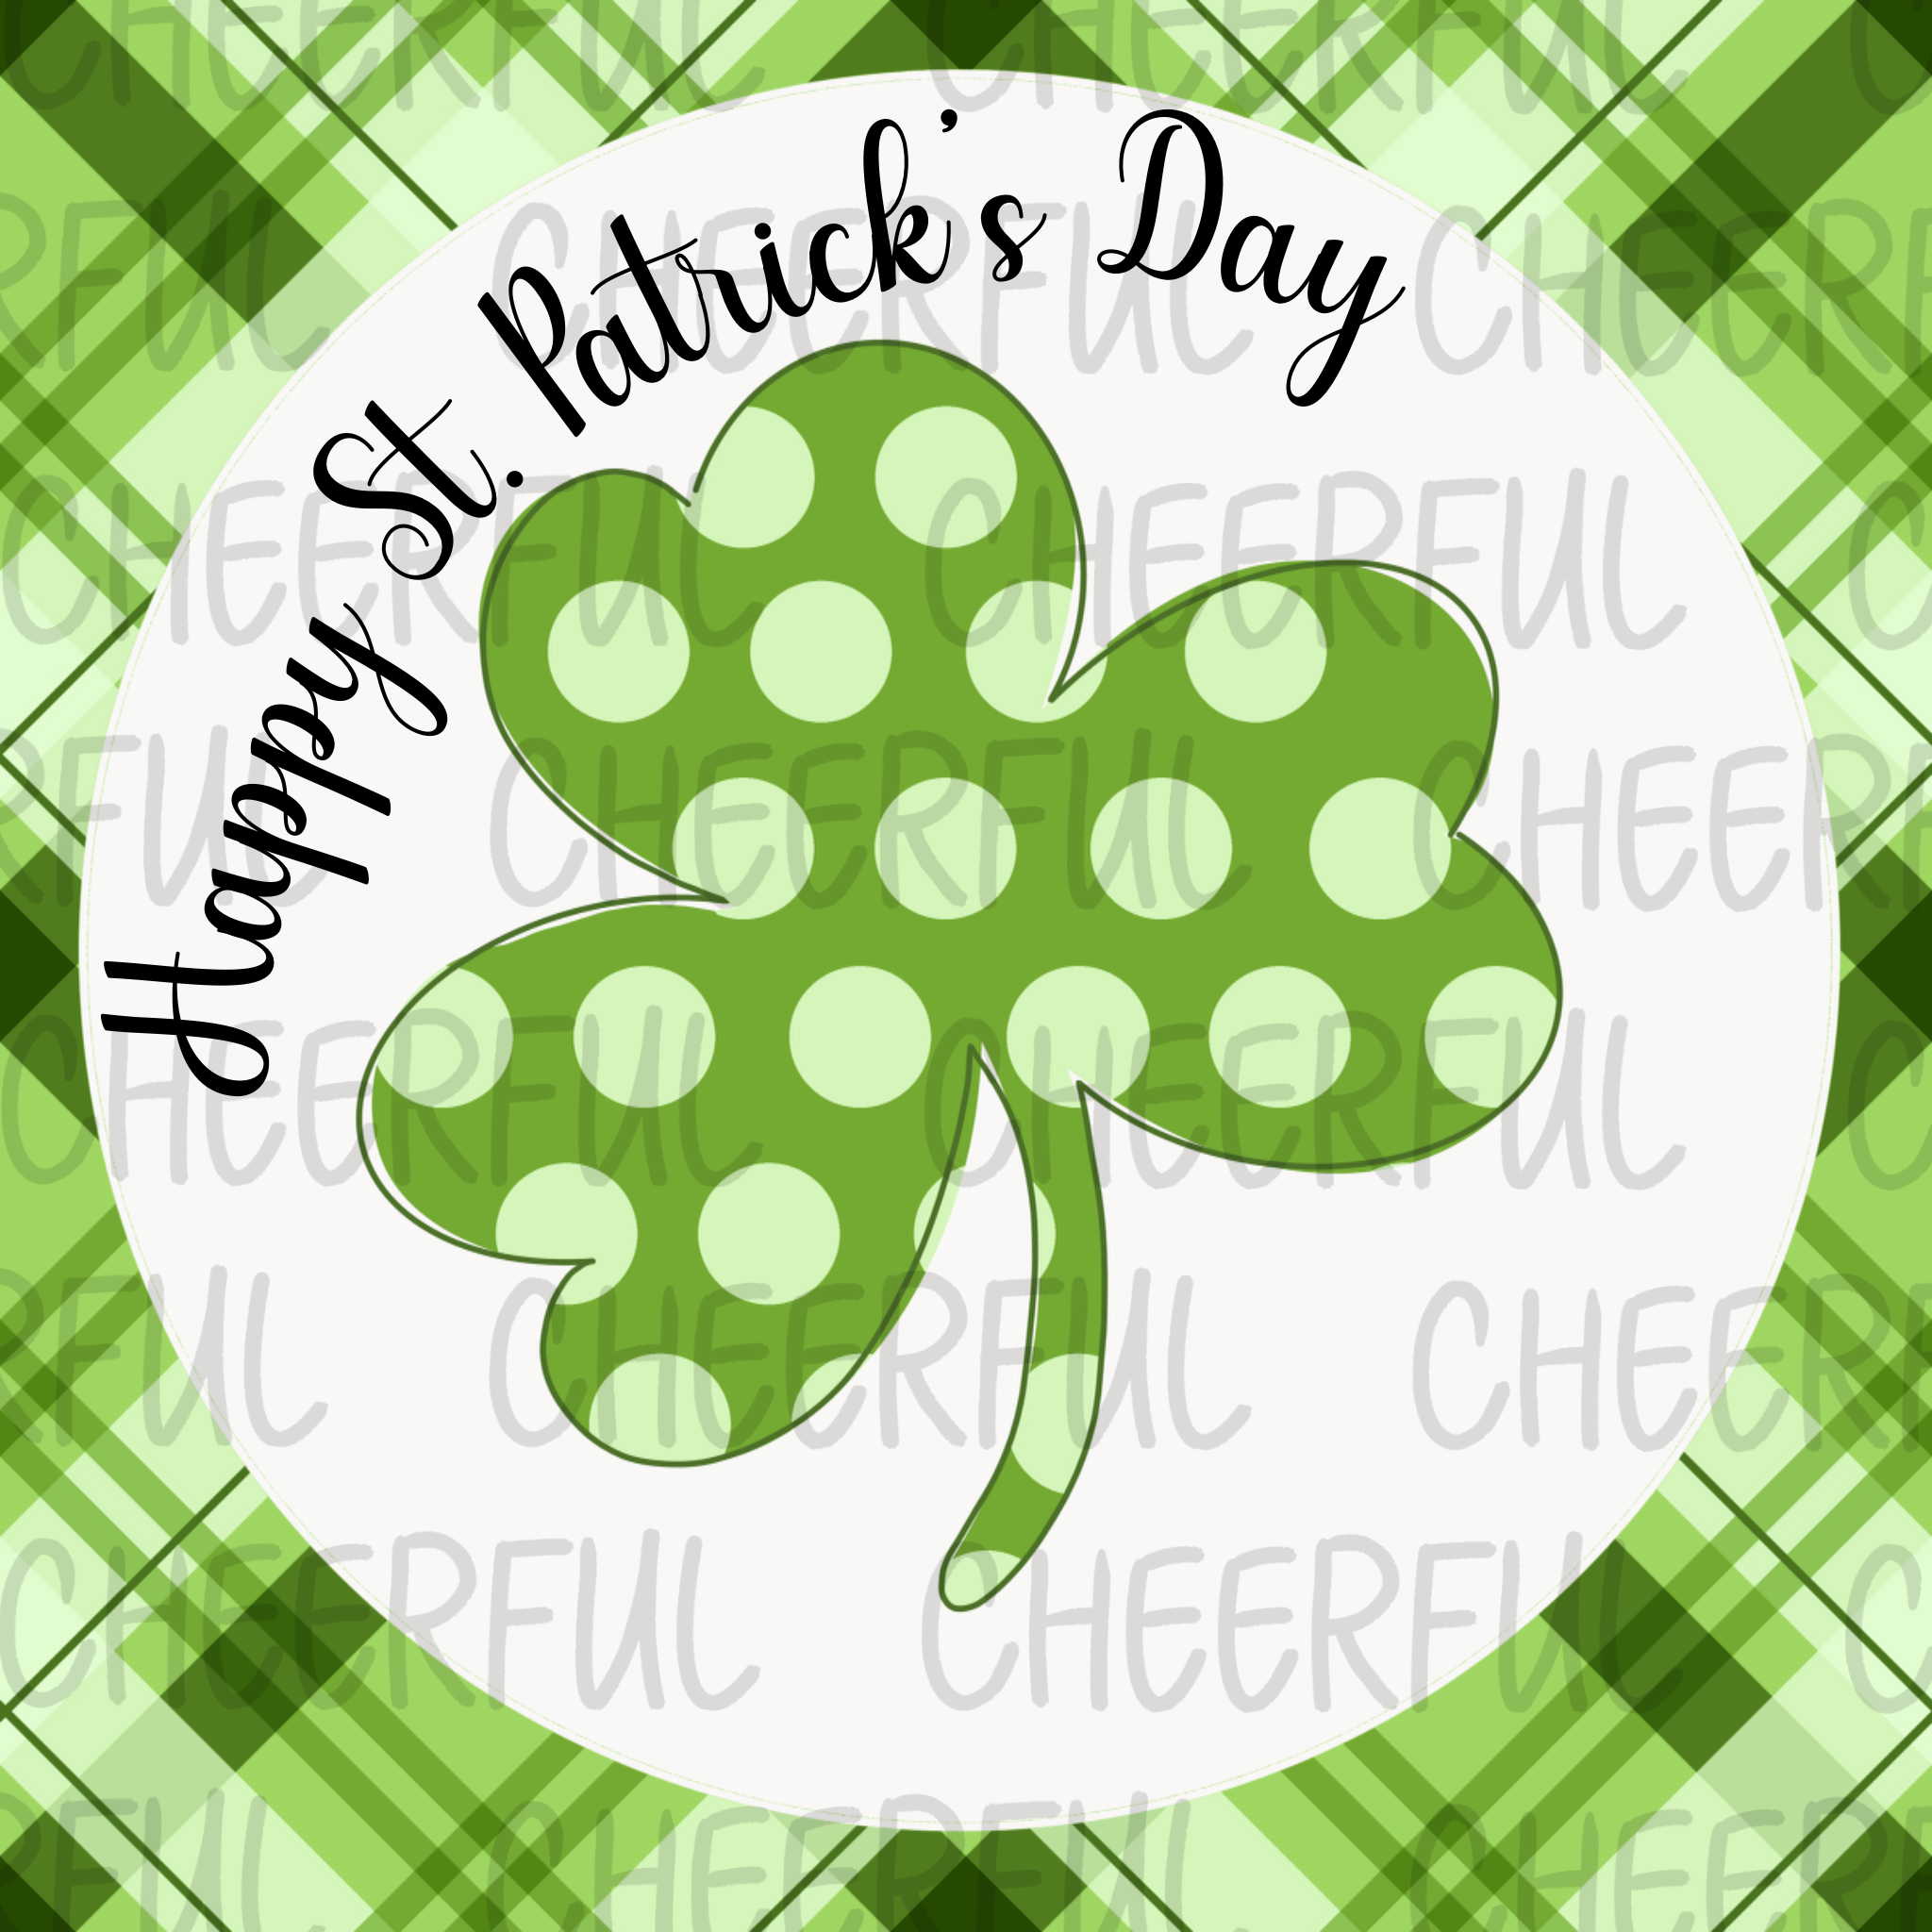 St. Patrick’s Day gift tag for decorated cookies- Digital Download